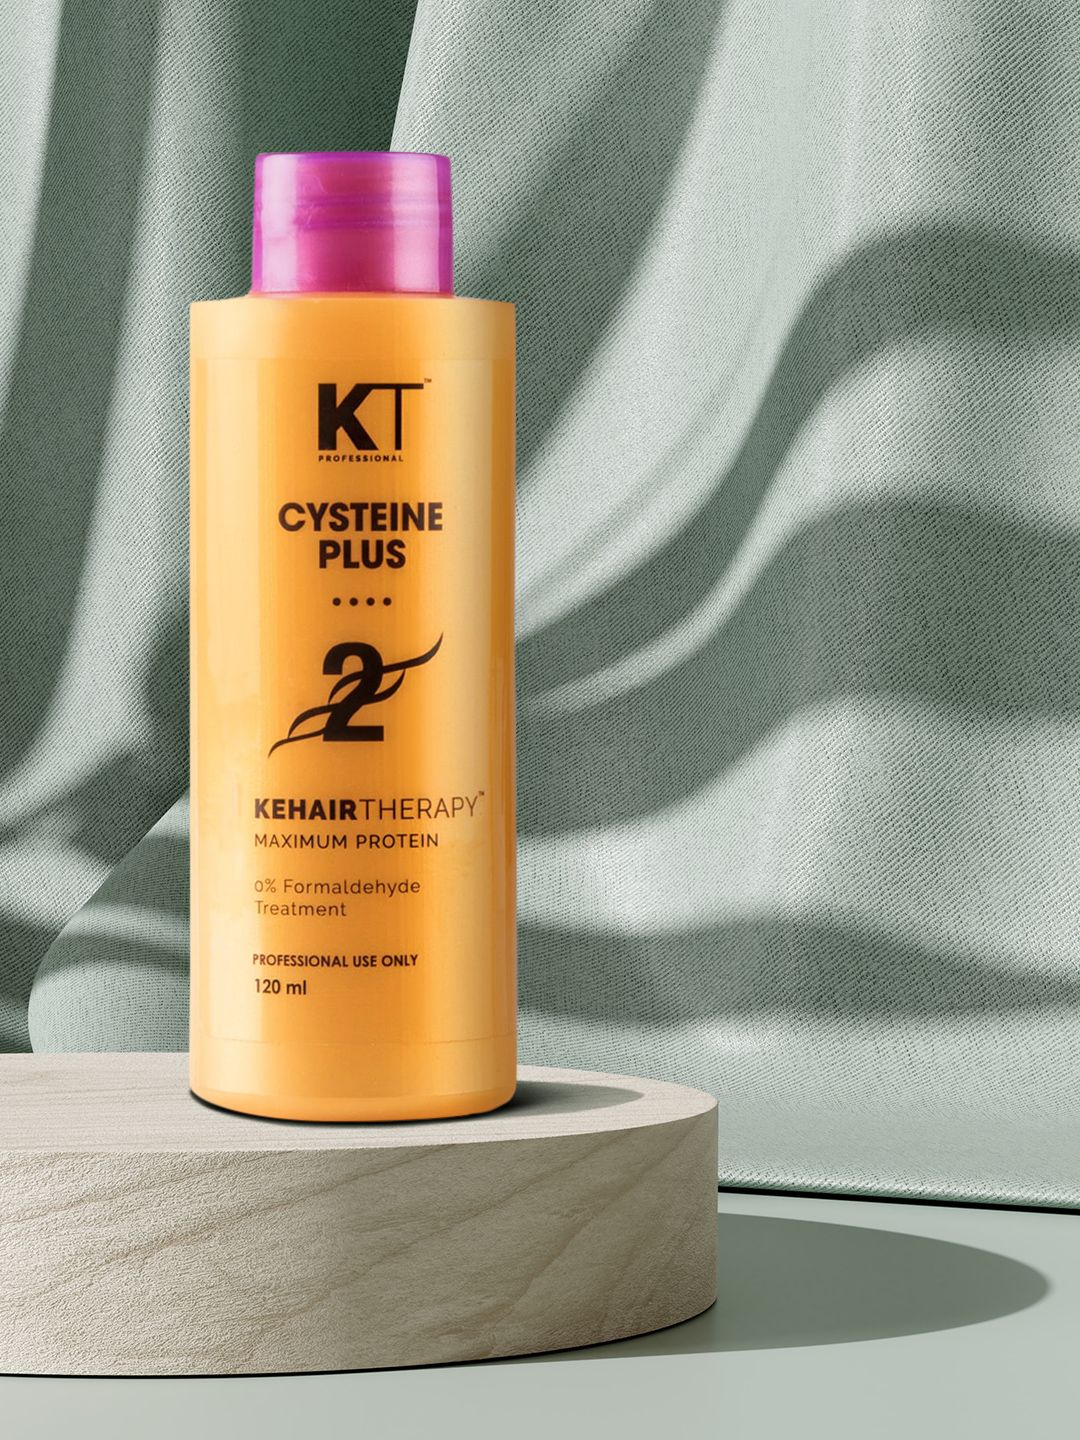 KEHAIRTHERAPY KT Professional Cystein Plus Kehair Therapy - 120 ml Price in India